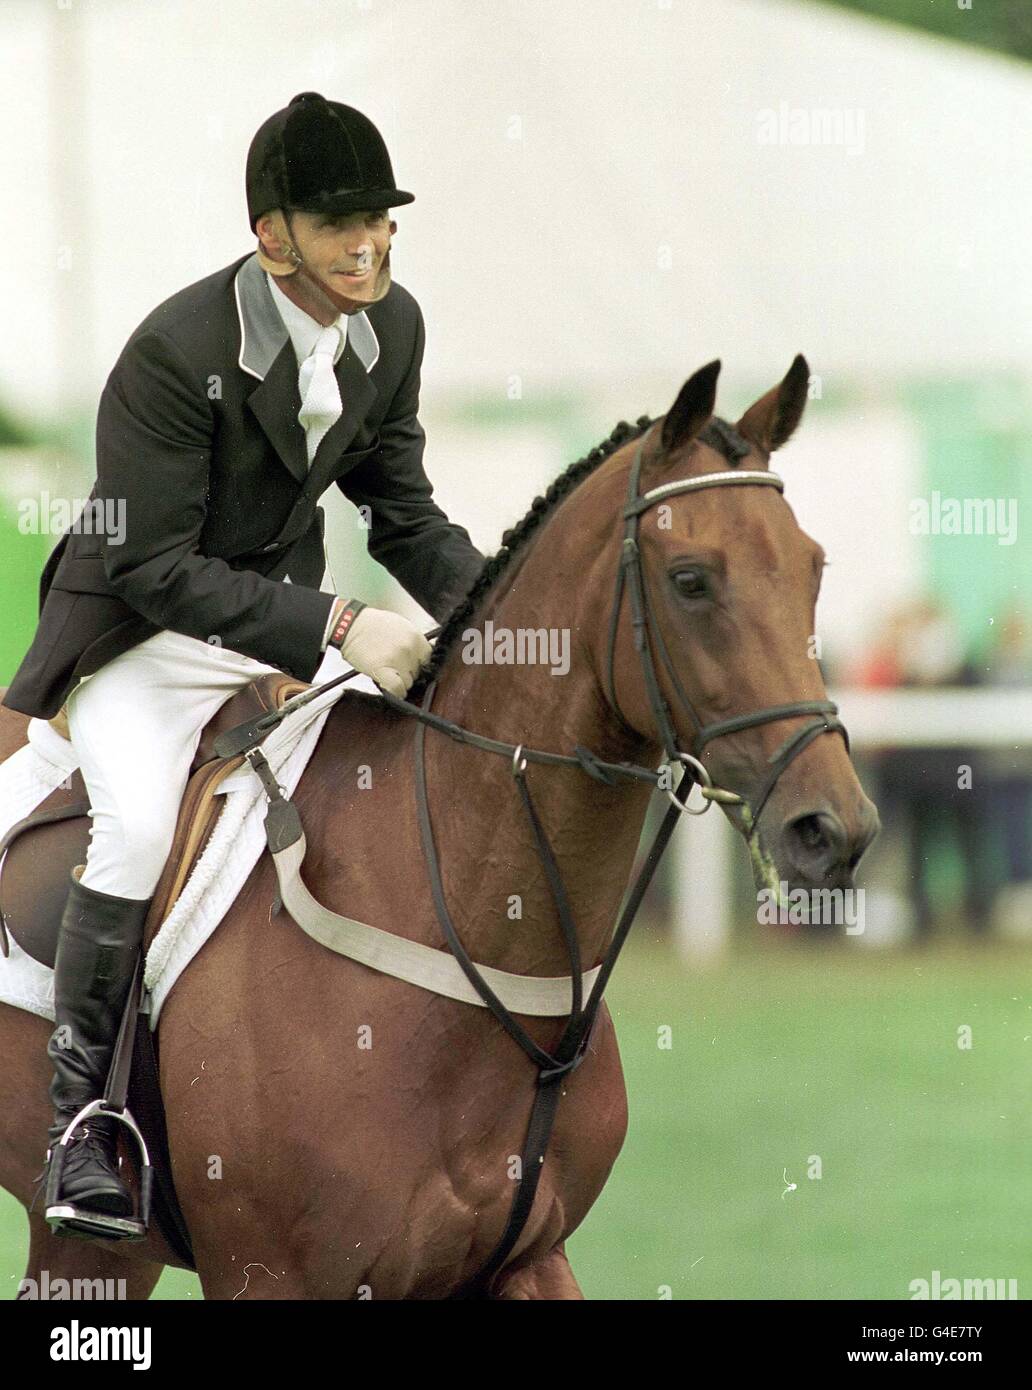 New Zealander, Blyth Tait on Chesterfield, winner of the 1998 Burghley Pedigree Chum Horse Trials, in Stamford Lincs today (Sunday). Photo by Kit Houghton. Stock Photo